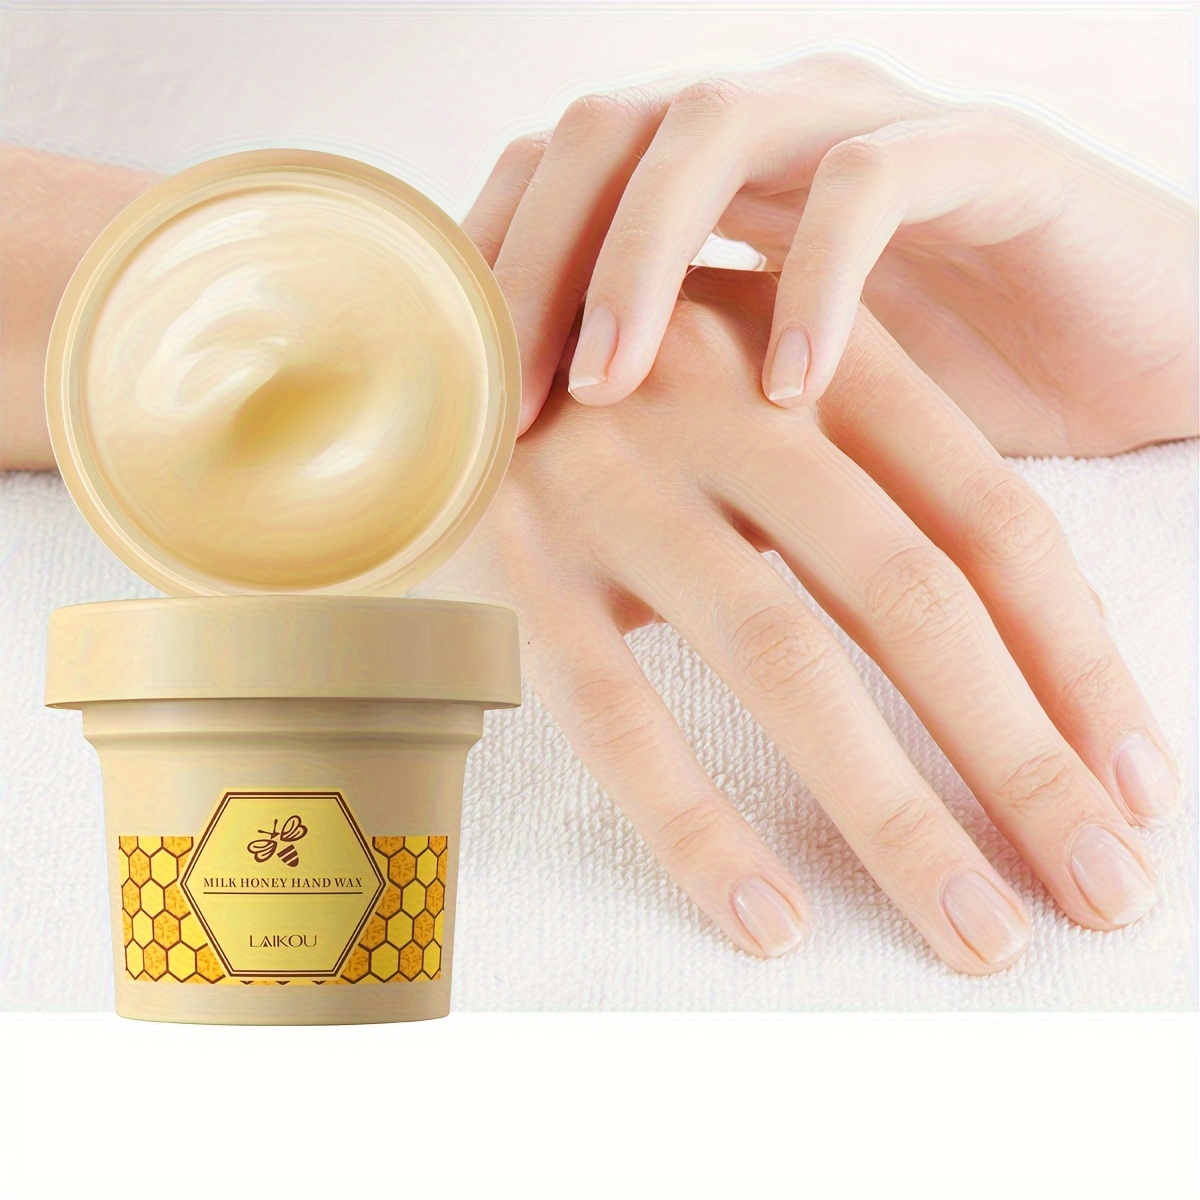 

1/2pcs Milk Honey Hand Wax, Peeling Hand Mask, Nourishing And Revitalize Your Hands, Hand Care Products